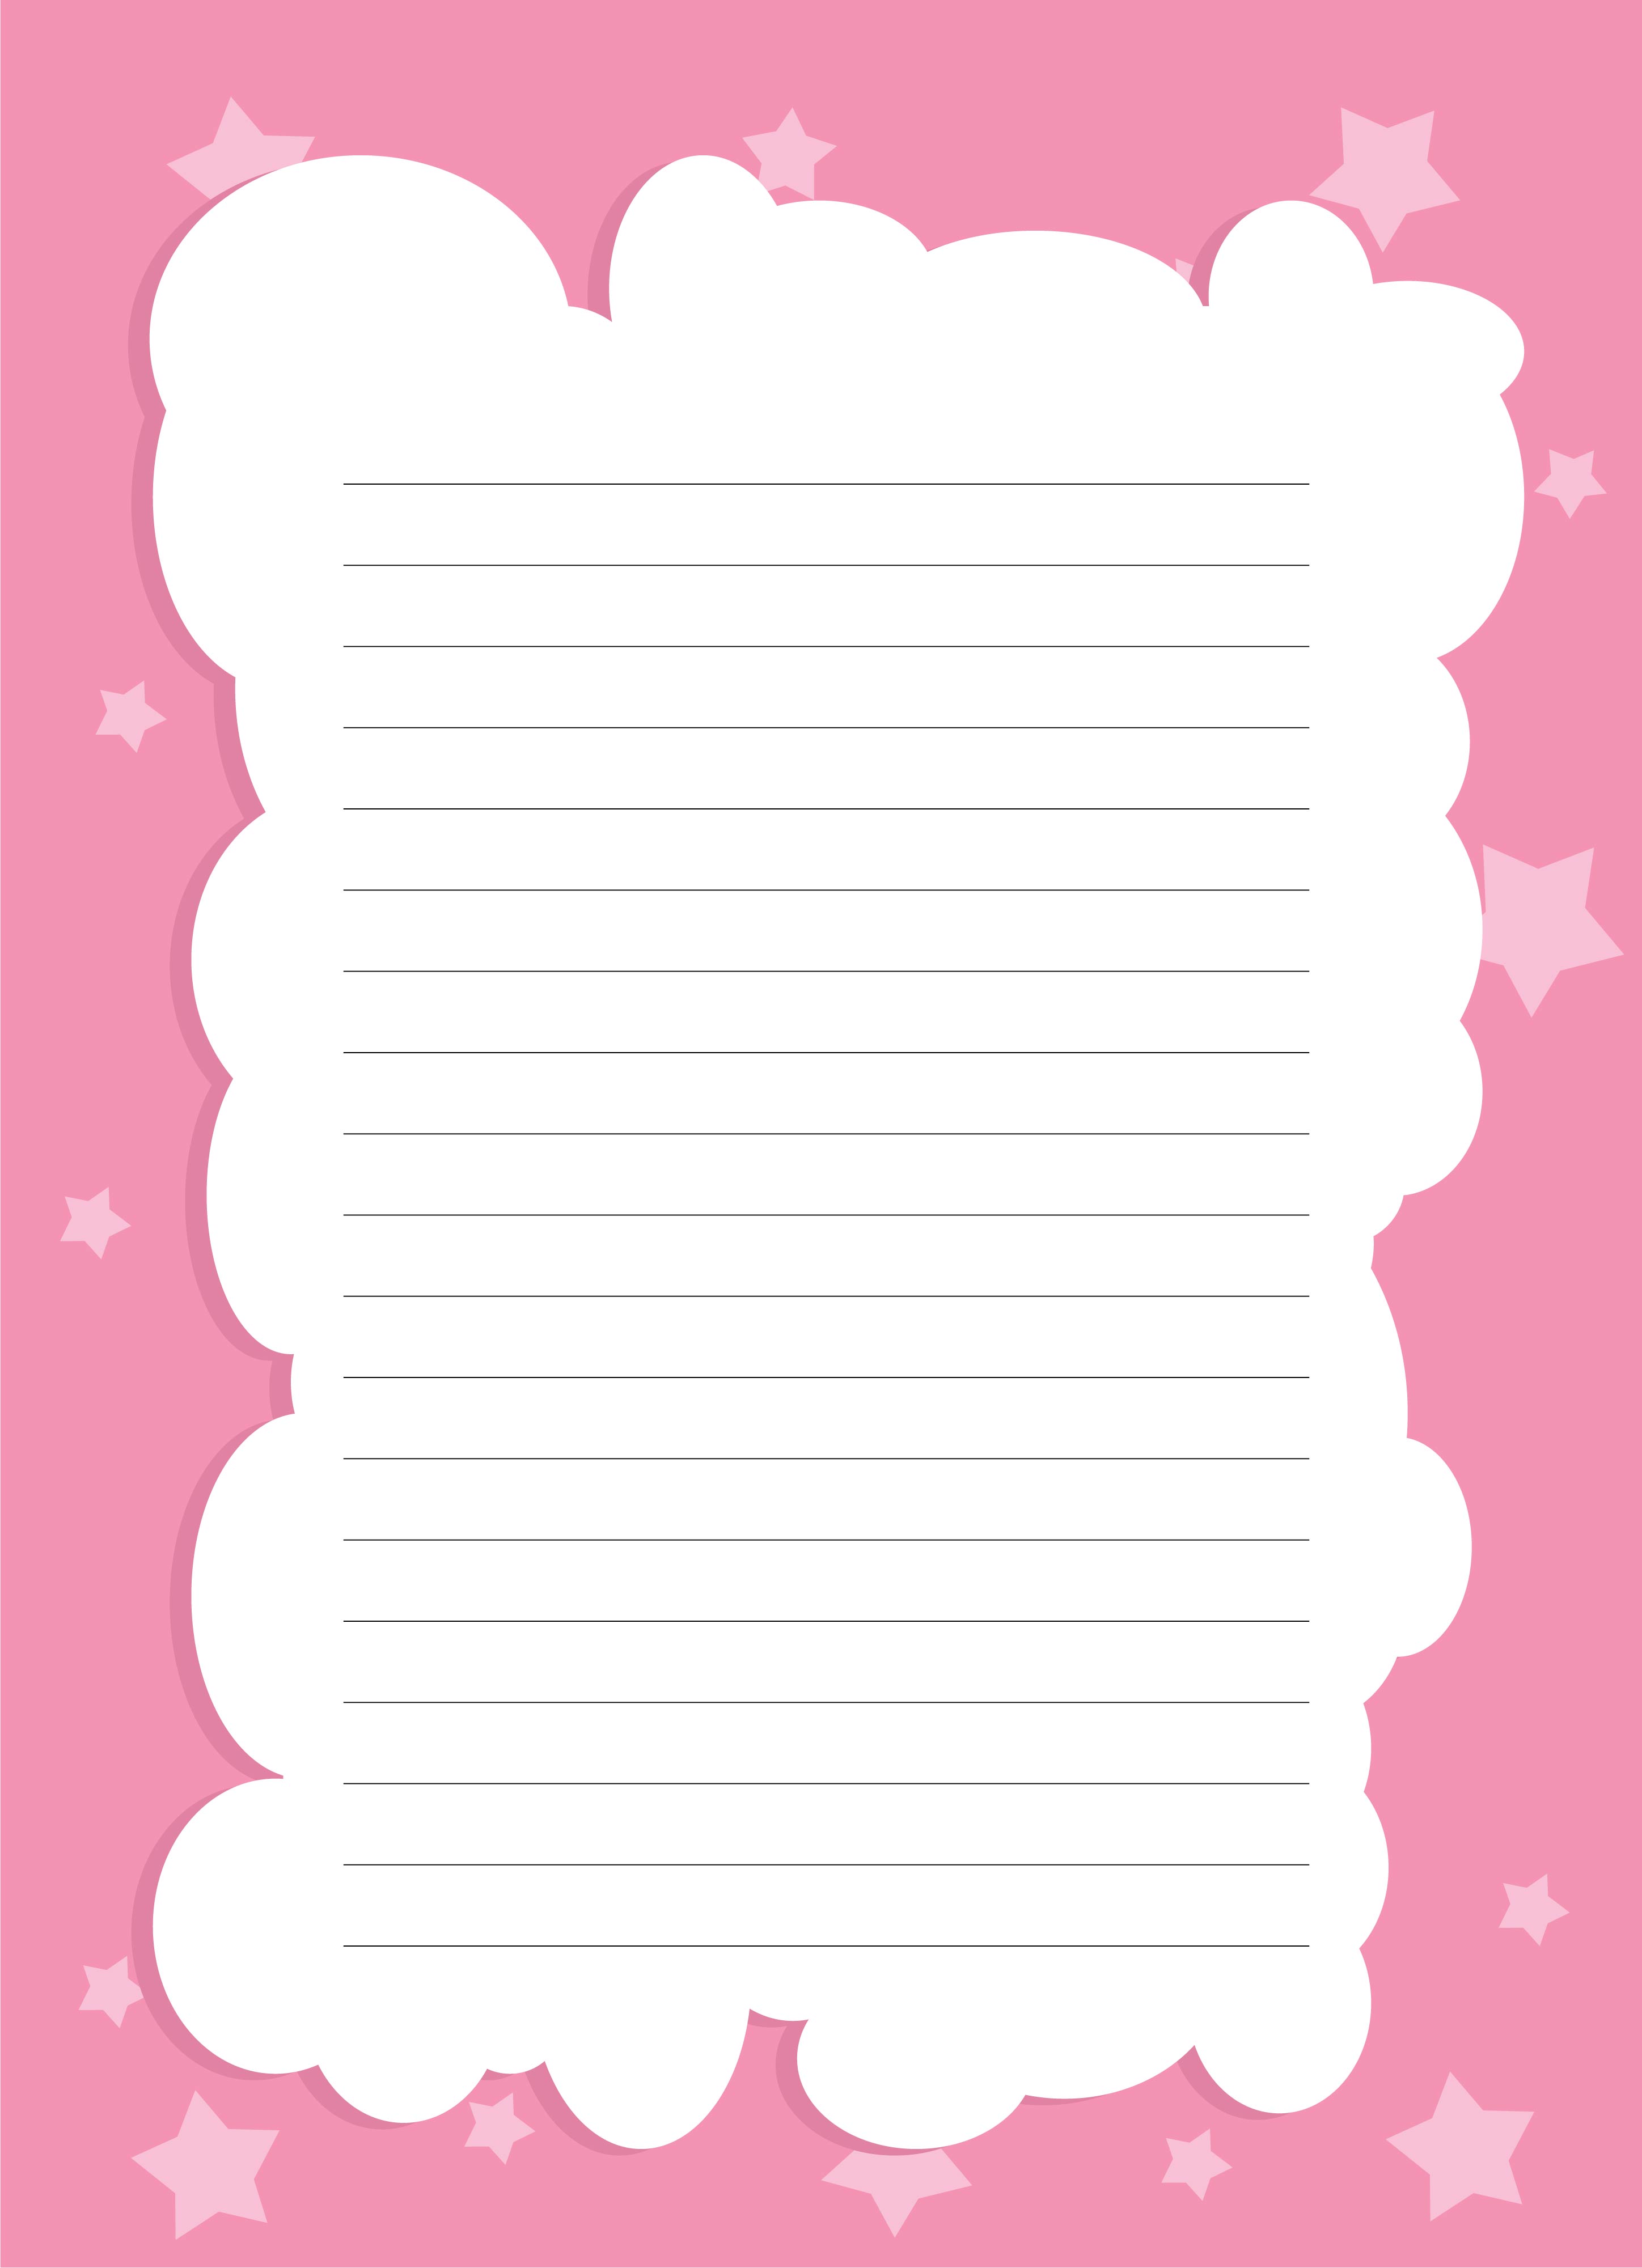 7-best-images-of-dog-free-printable-lined-writing-paper-with-borders